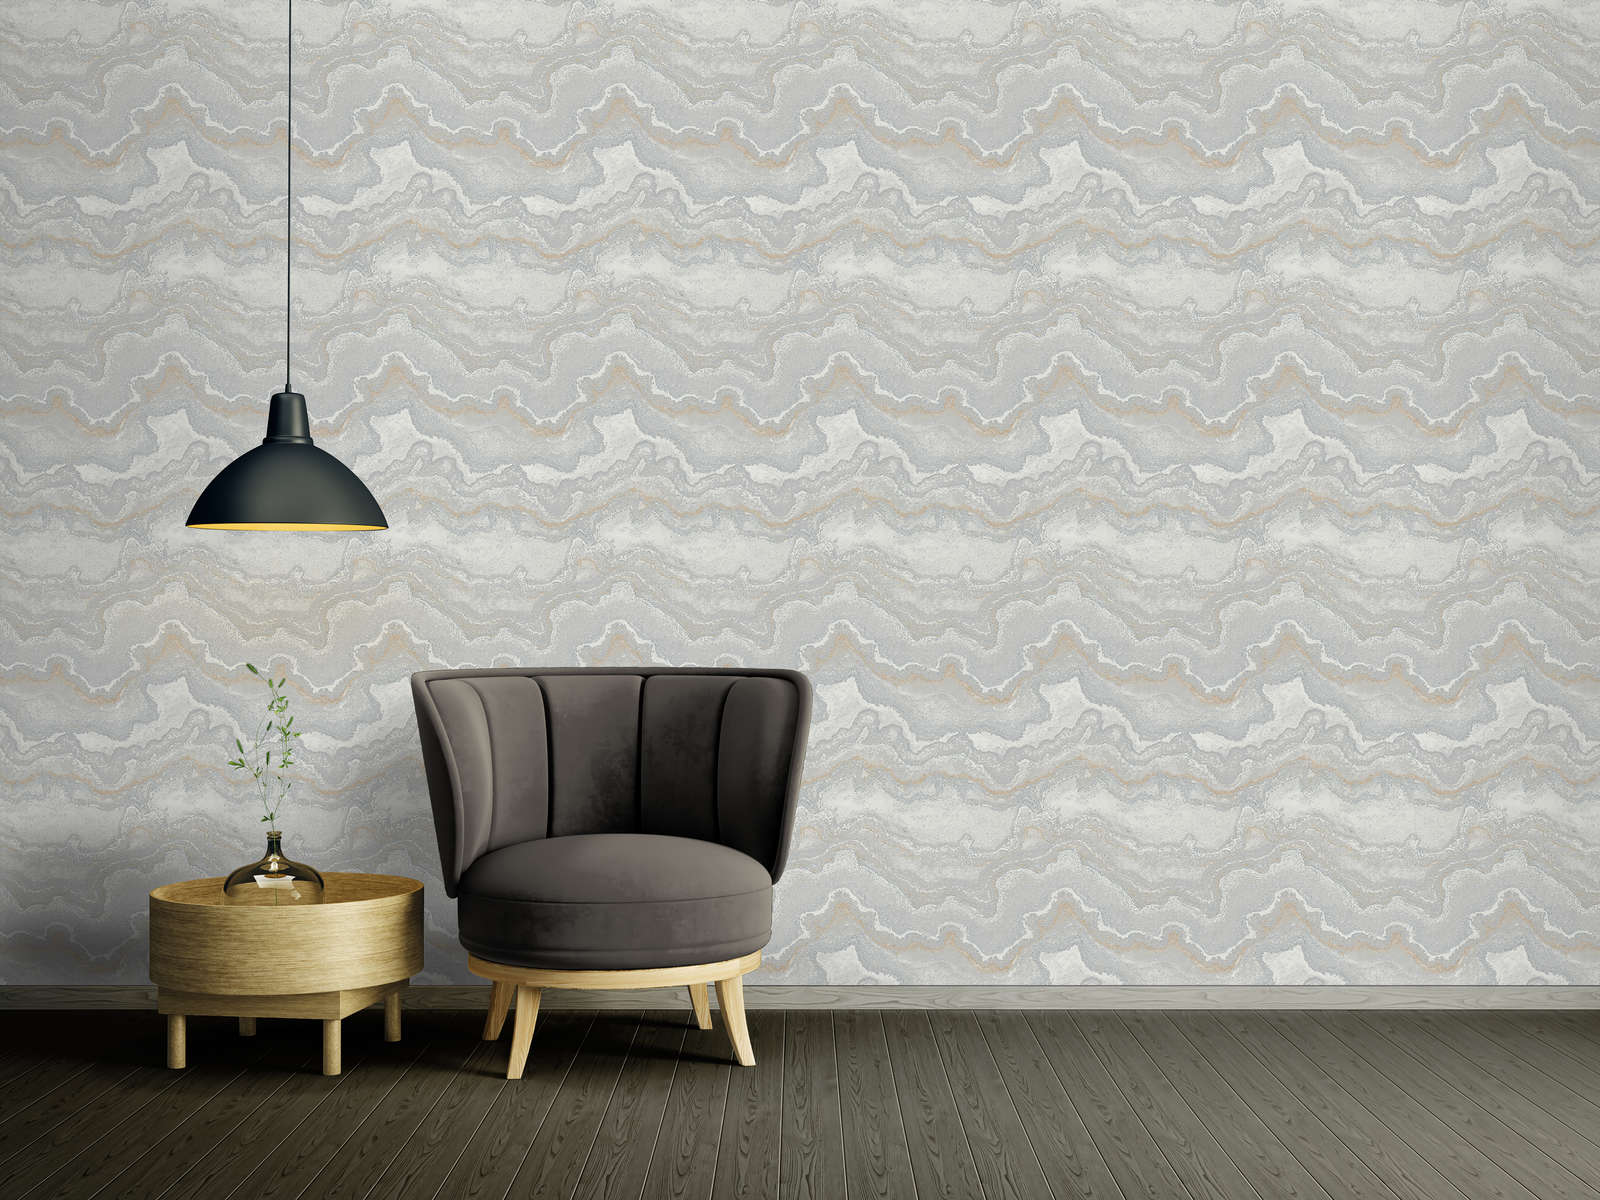             Non-woven wallpaper with marble pattern - grey, silver, gold
        